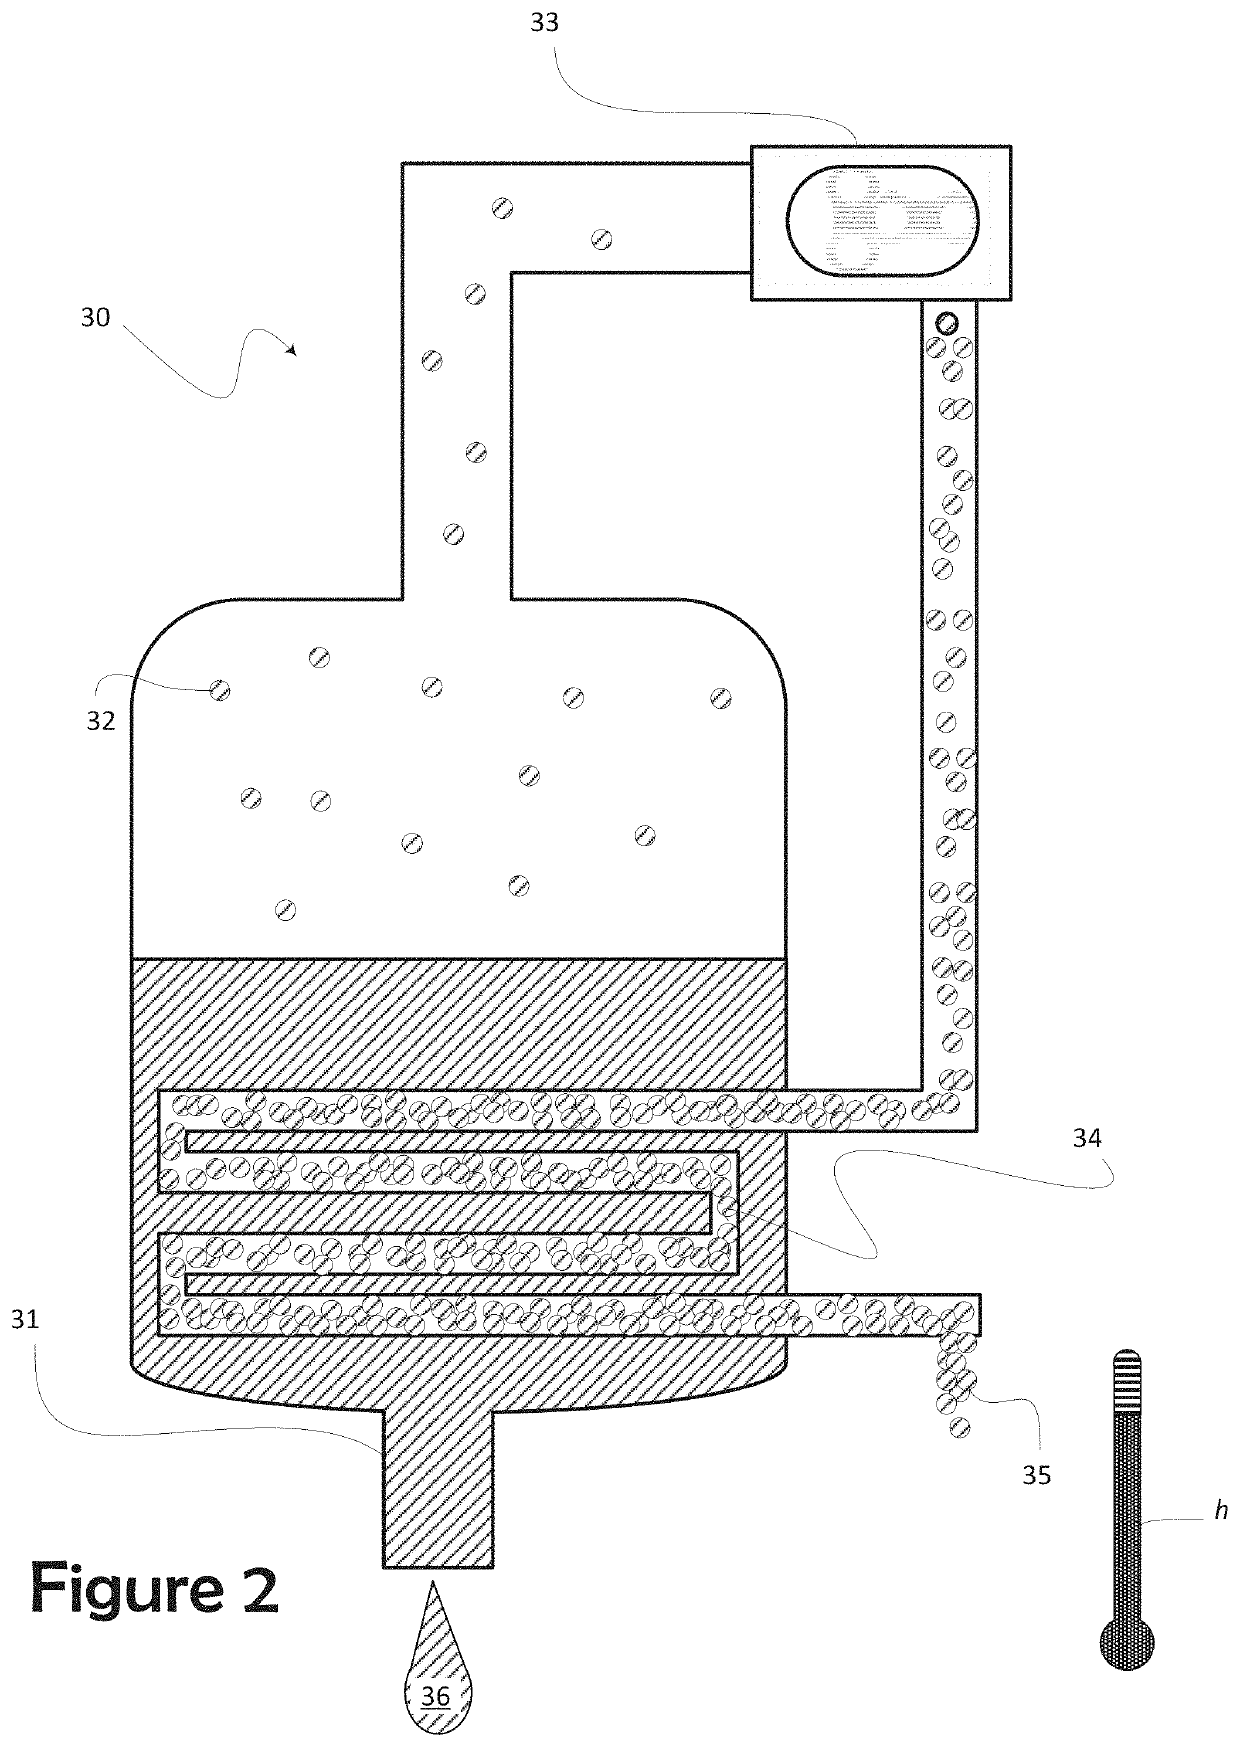 Method and system for compounding fertilizer from manure without nutrient emission